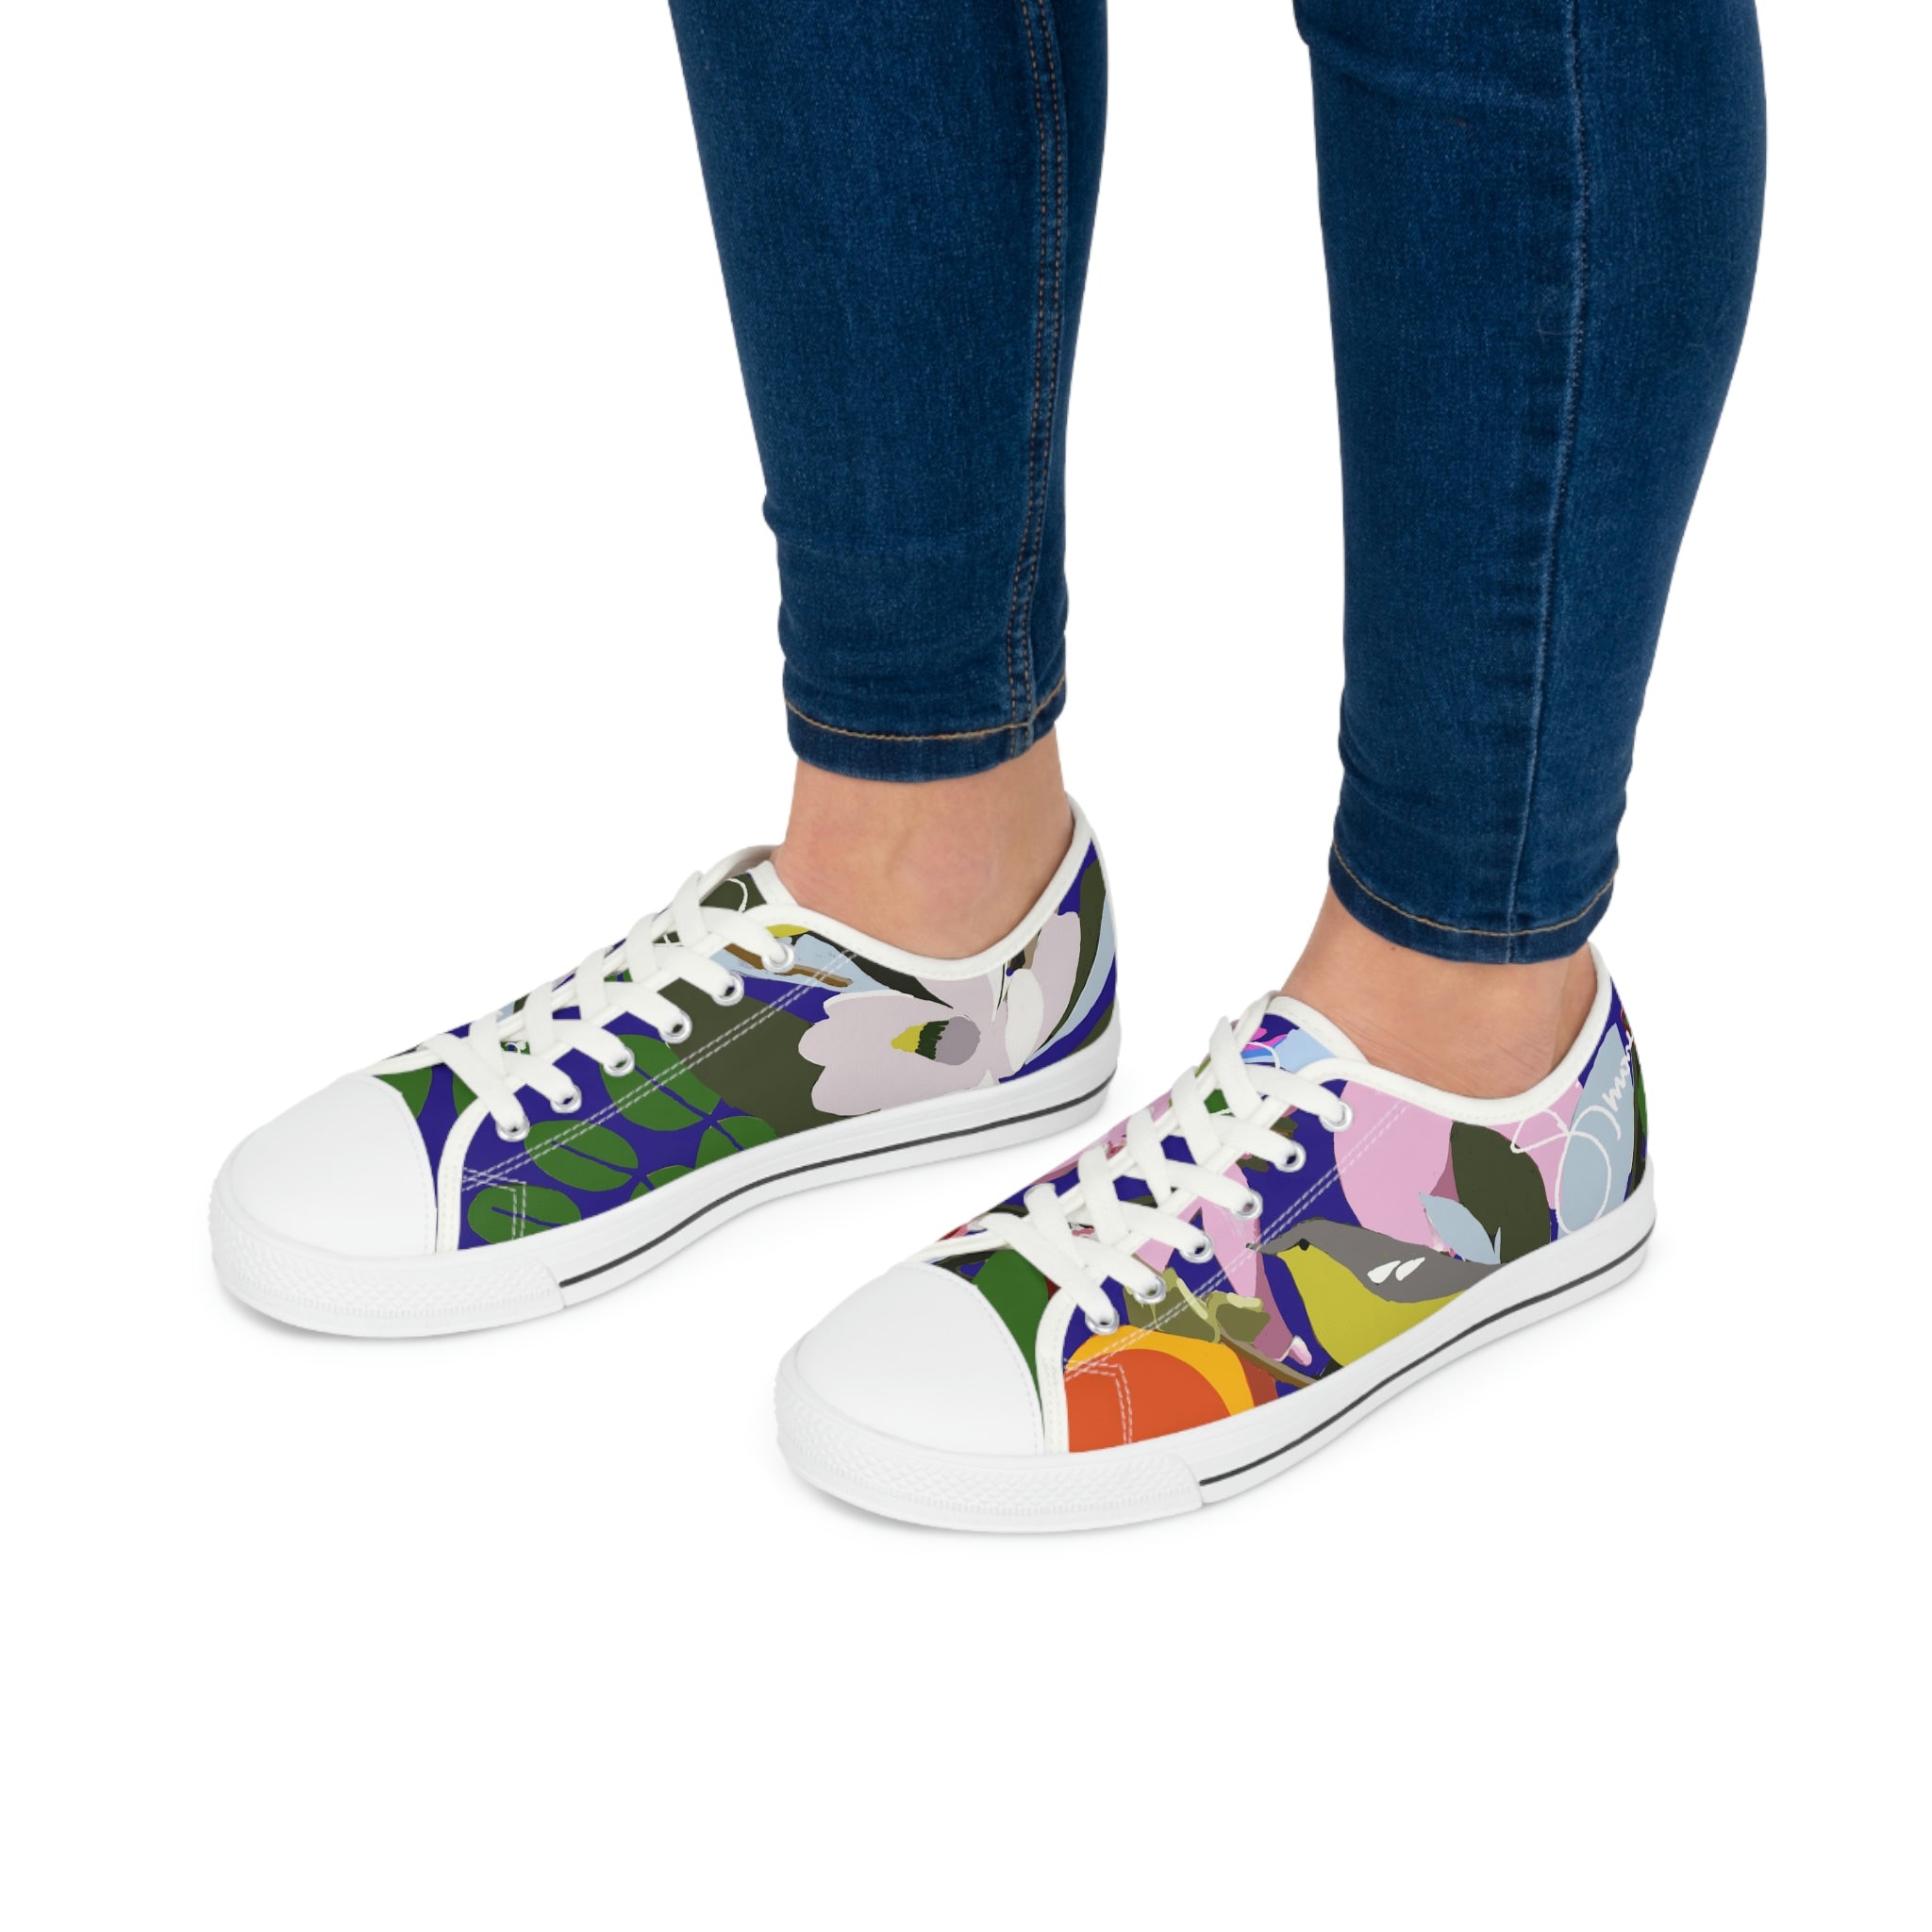 "New Day" Women's Low Top Sneakers